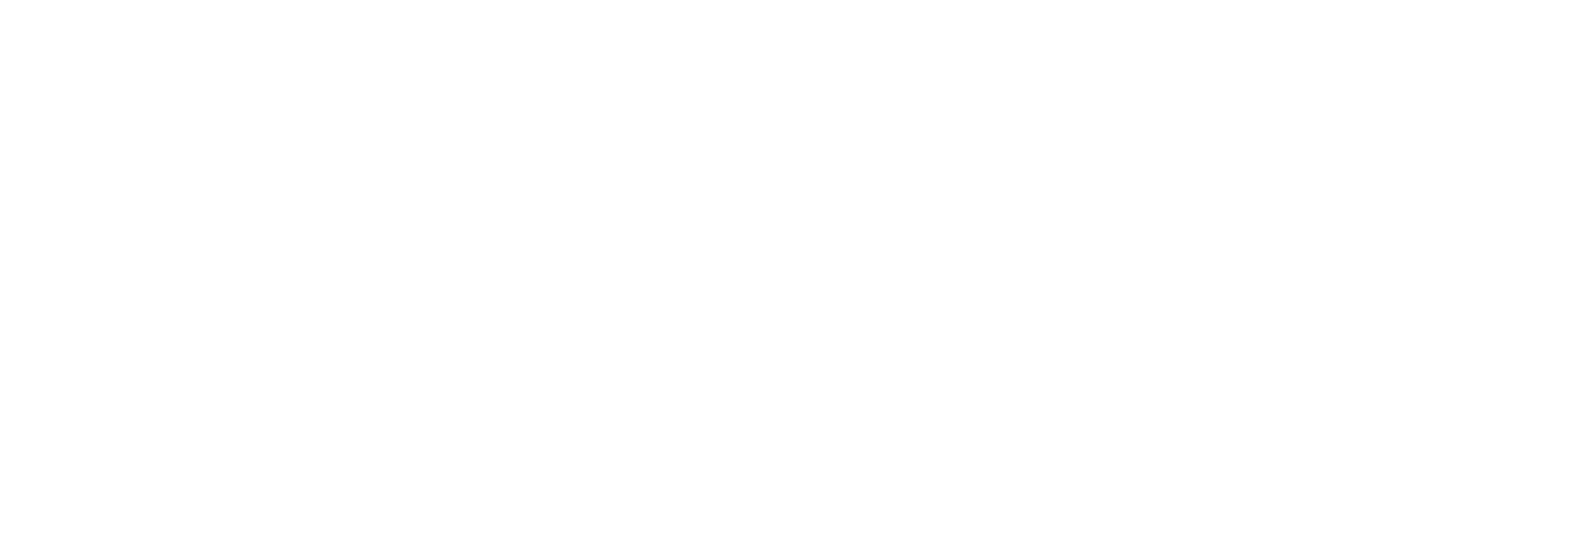 Secured Communications